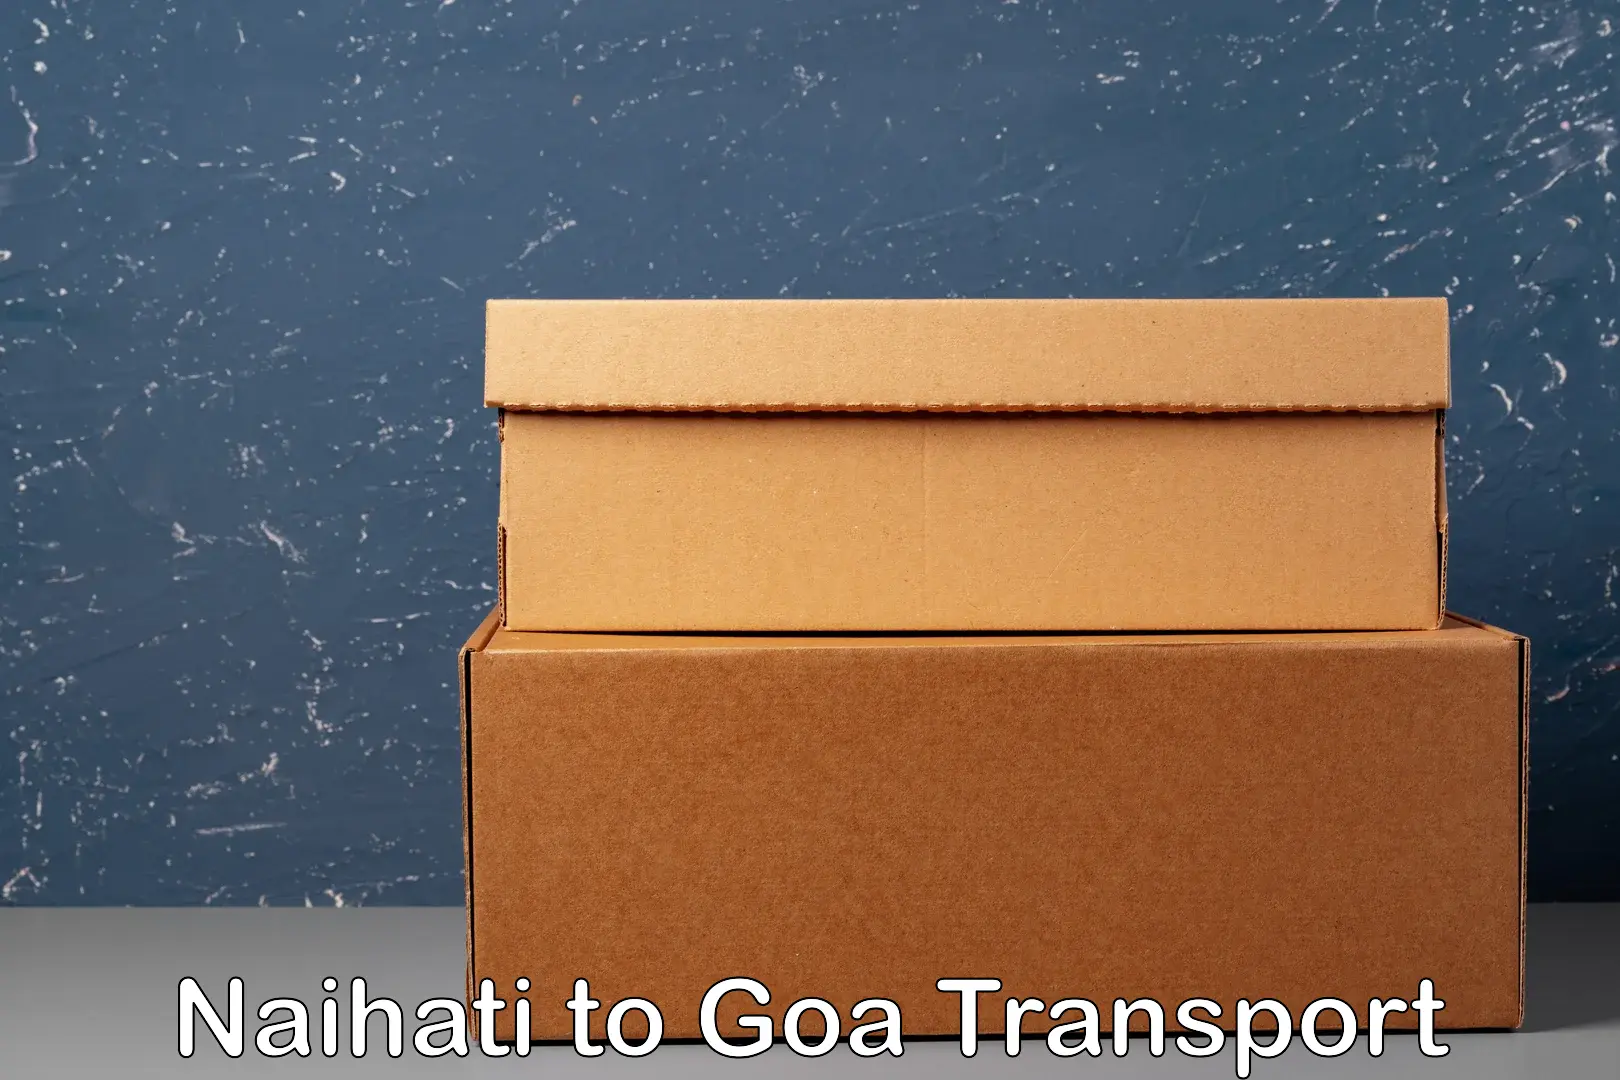 Shipping services in Naihati to Goa